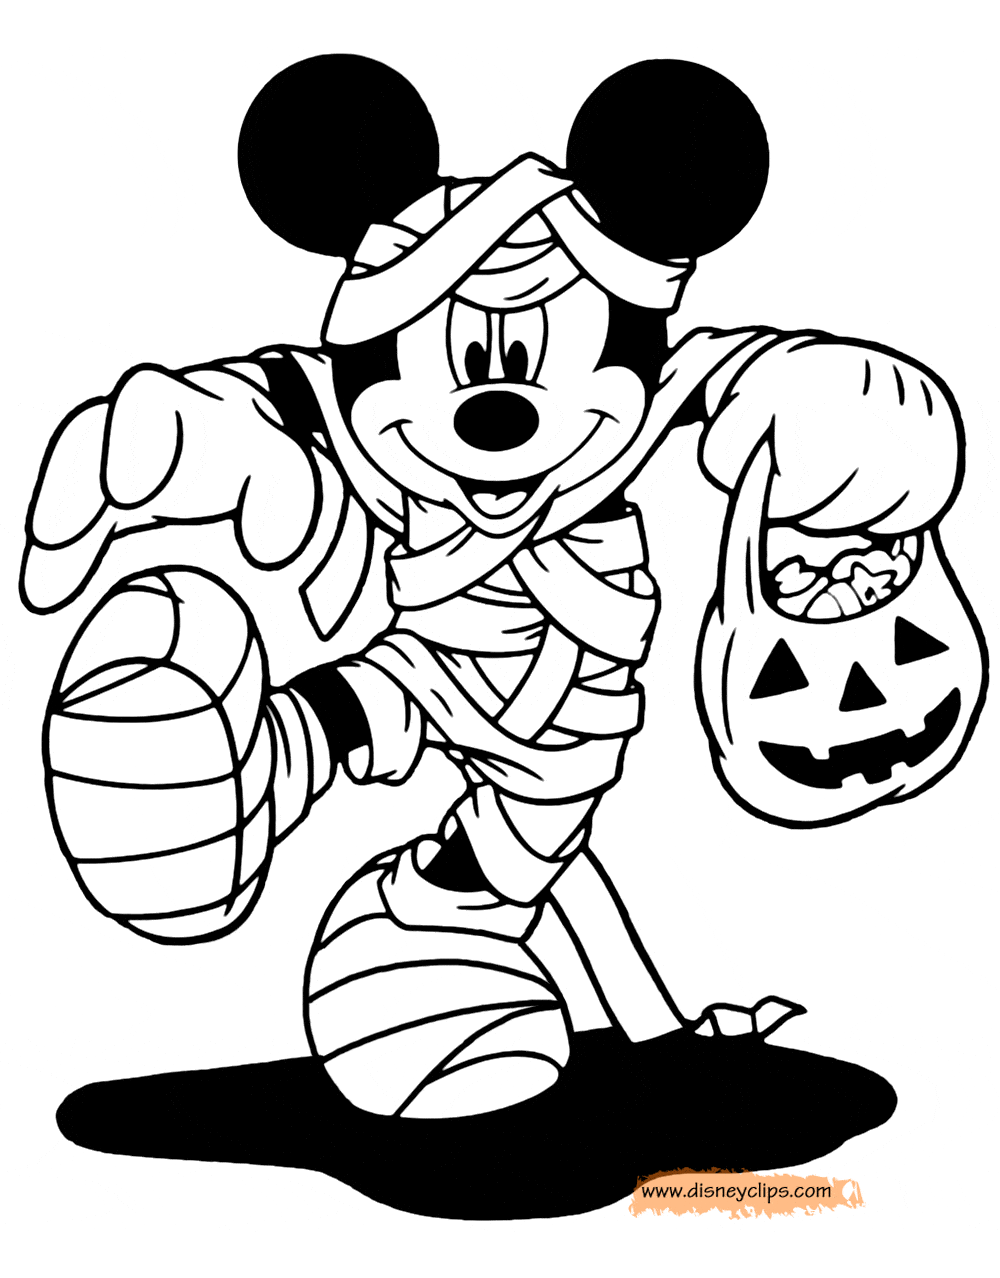 Halloween Mickey Mouse Coloring Pages - Coloring Home